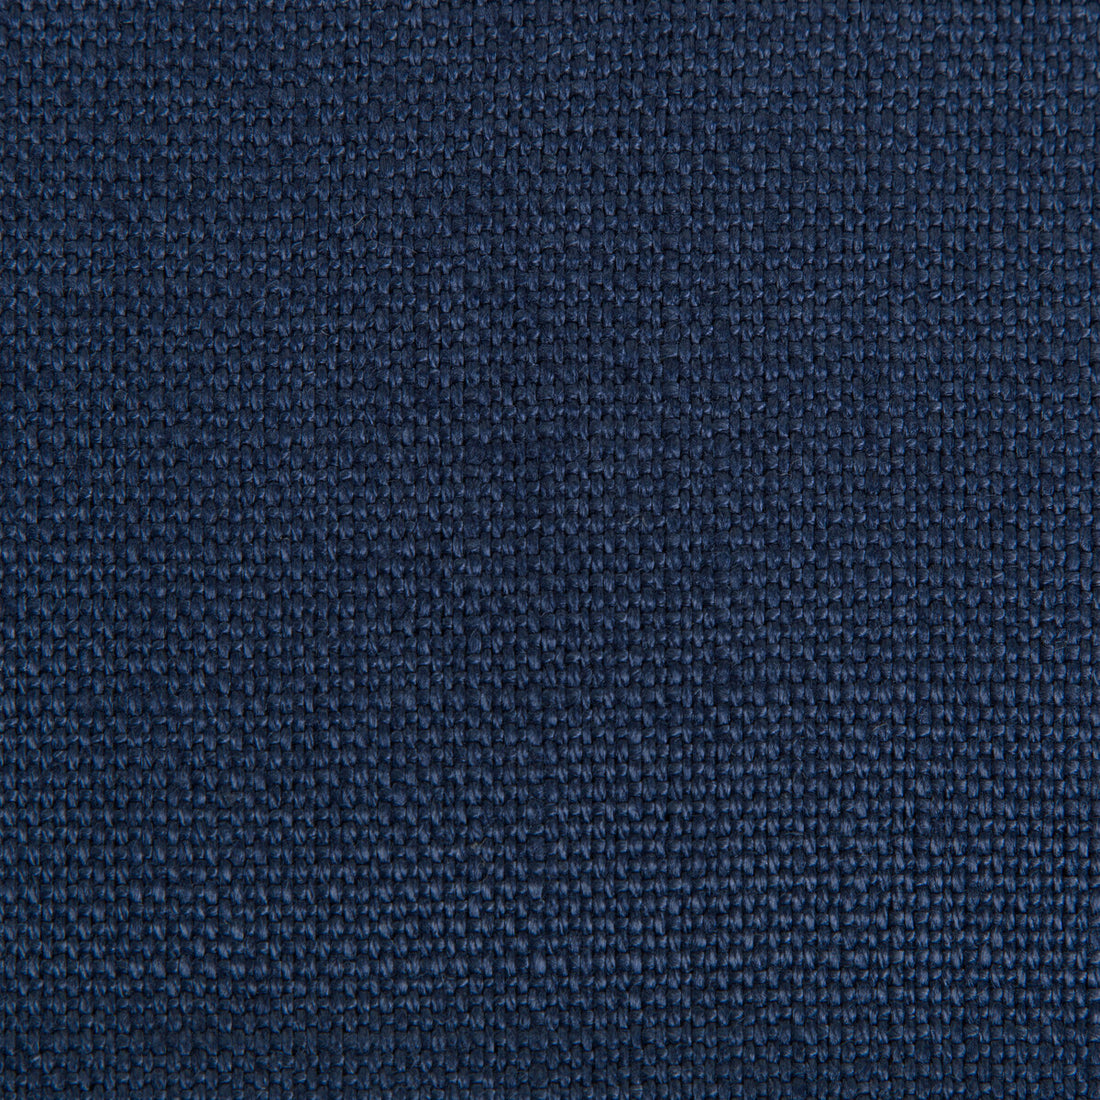 Stone Harbor fabric in nautical color - pattern 27591.5050.0 - by Kravet Basics